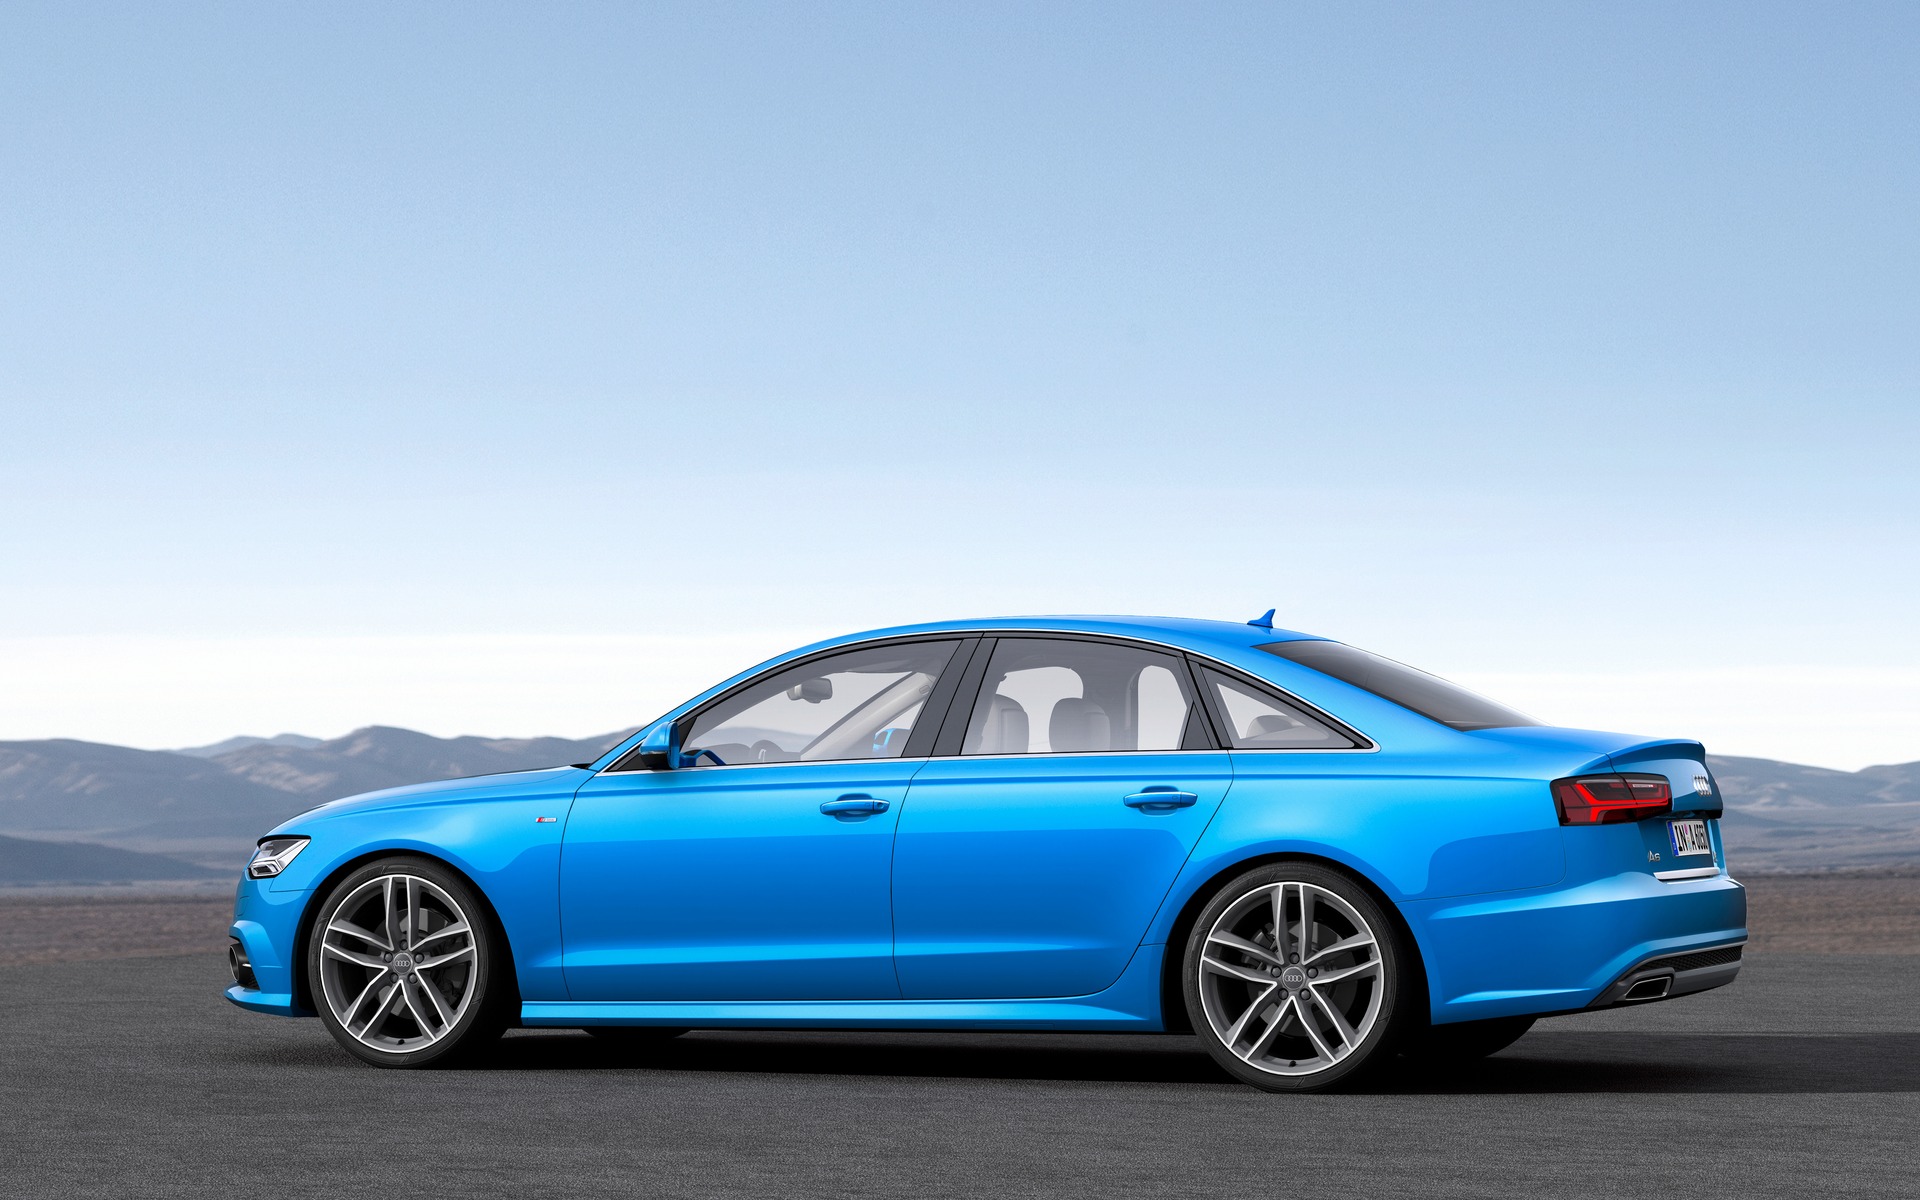 The sportiest in the bunch is the S6.